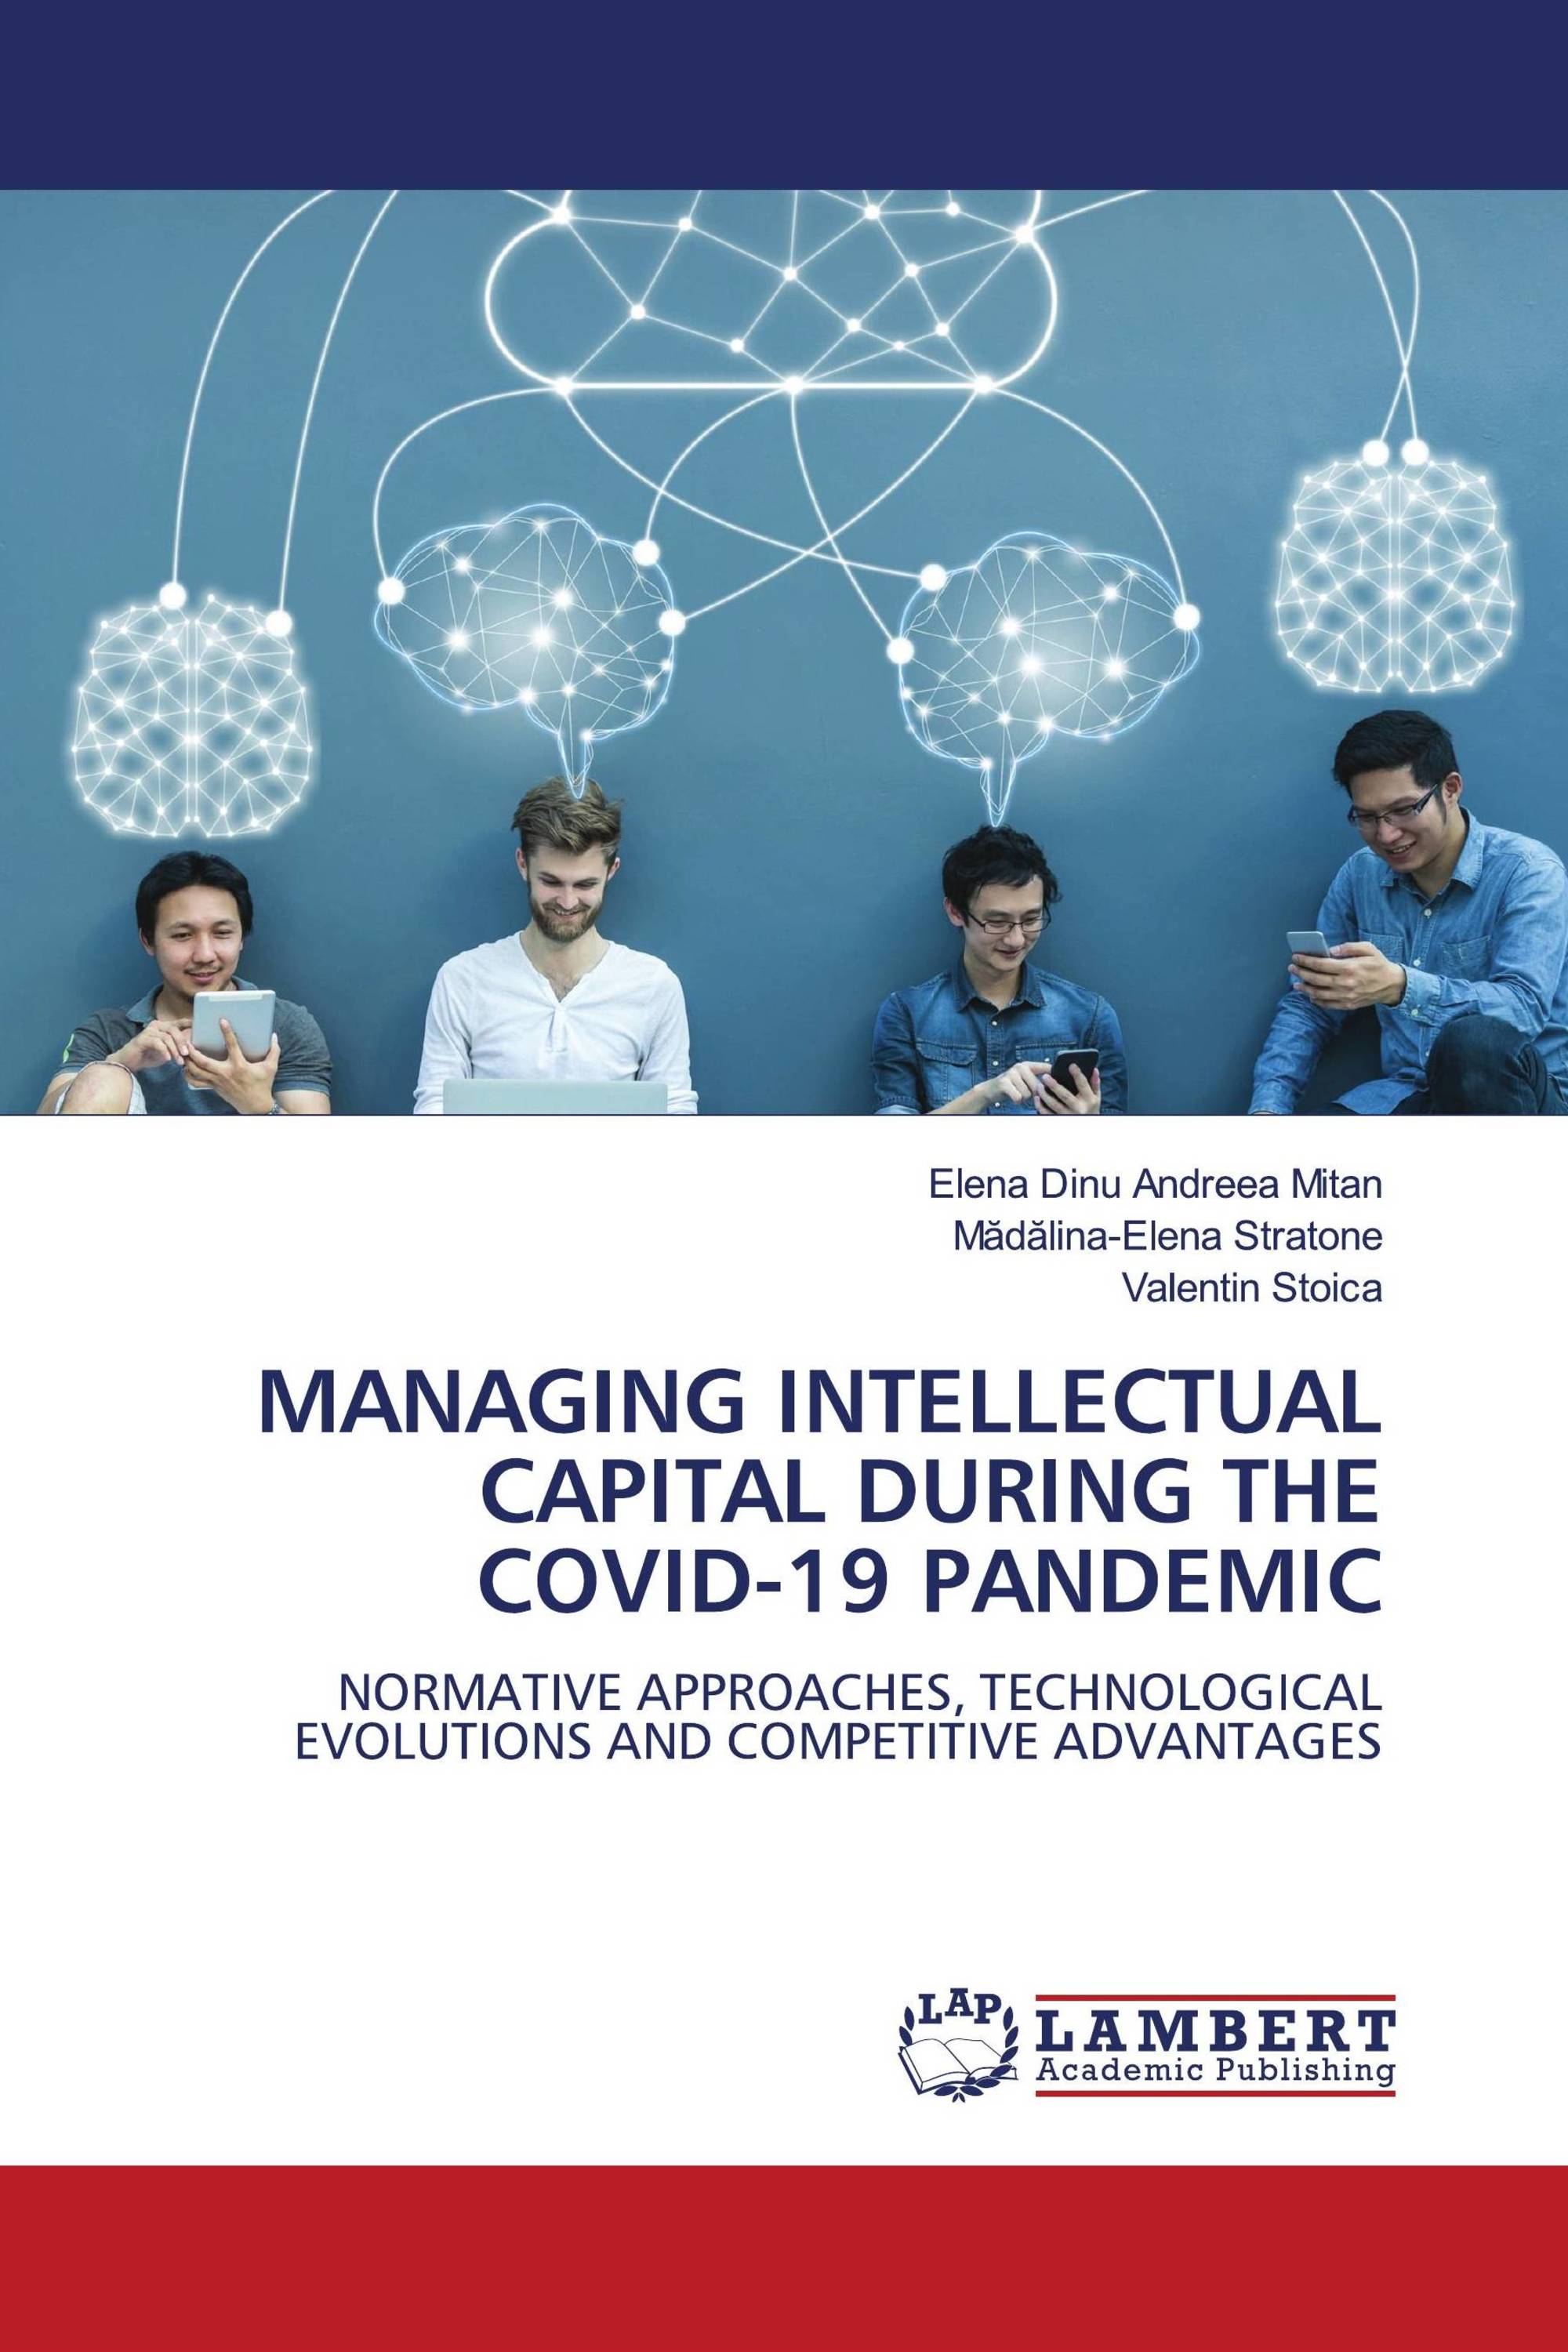 MANAGING INTELLECTUAL CAPITAL DURING THE COVID-19 PANDEMIC